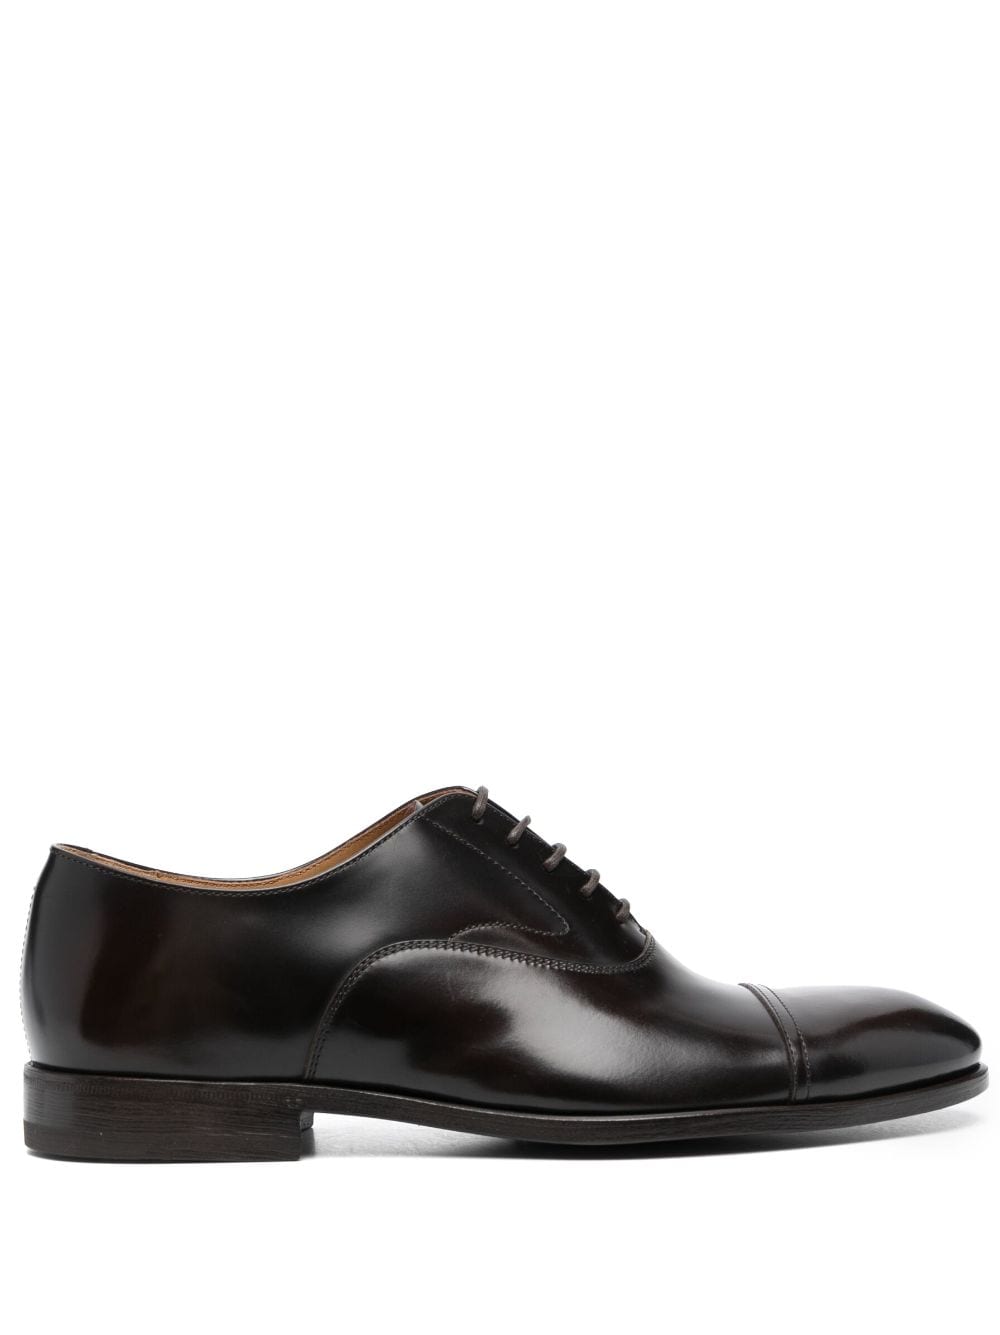 Henderson Baracco almond-toe leather derby shoes - Brown